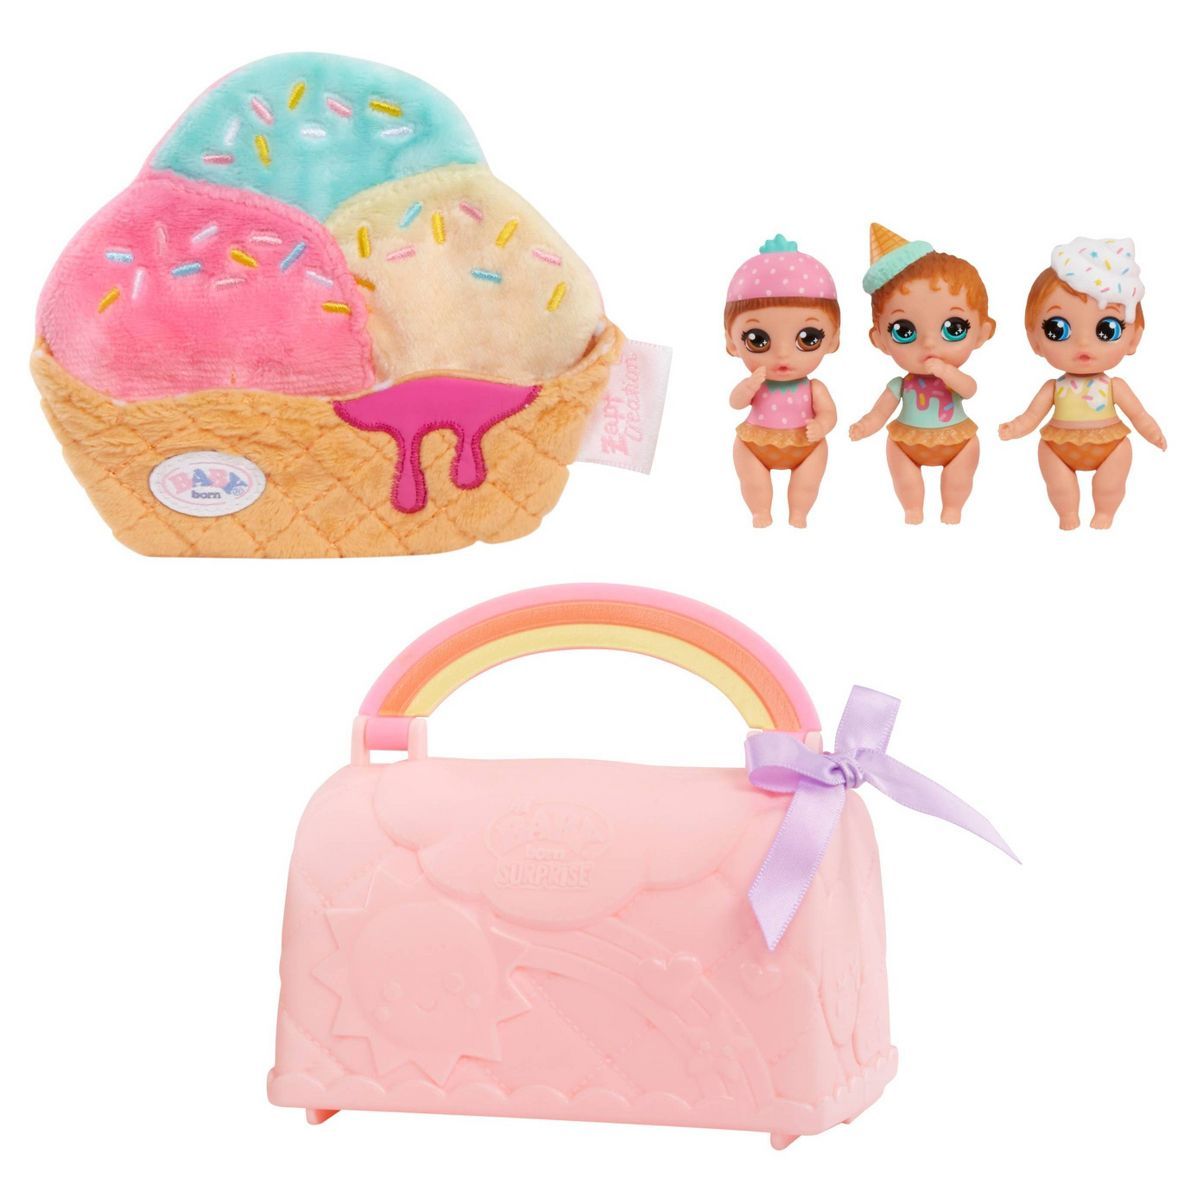 BABY Born Surprise Mini Babies Collectible Dolls Series 6 | Target